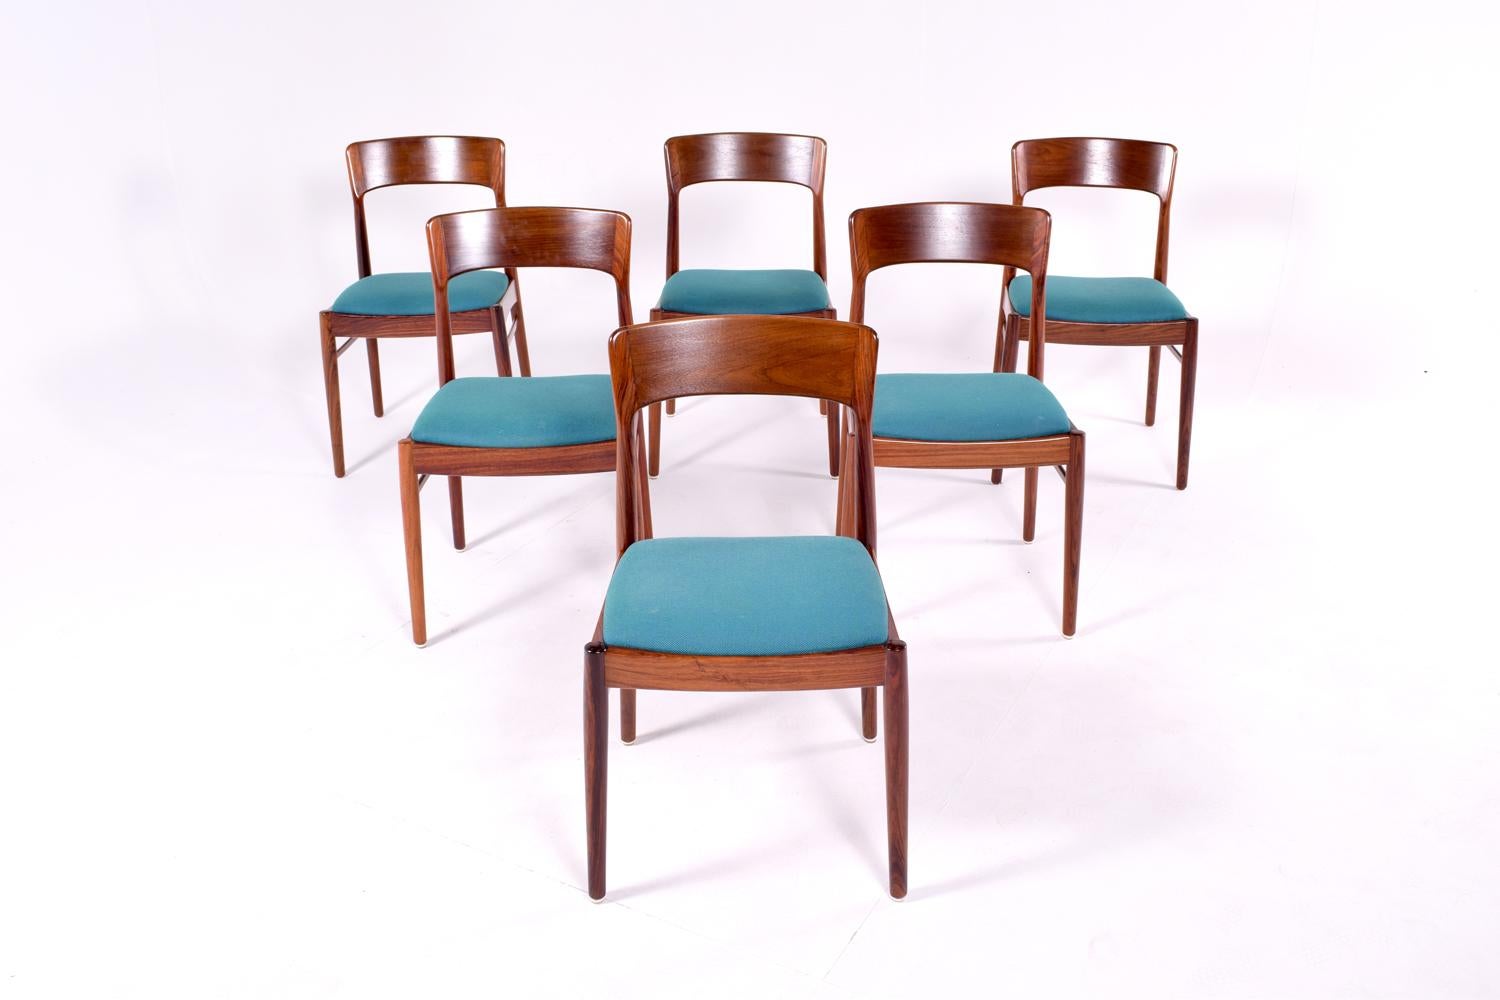 Set of 6 dining chairs in rosewood. Wadding in Danish fabric.
The chairs are in solid rosewood frame with and elegant carved back.
Delicate and detailed design of the legs and back, great joinery.